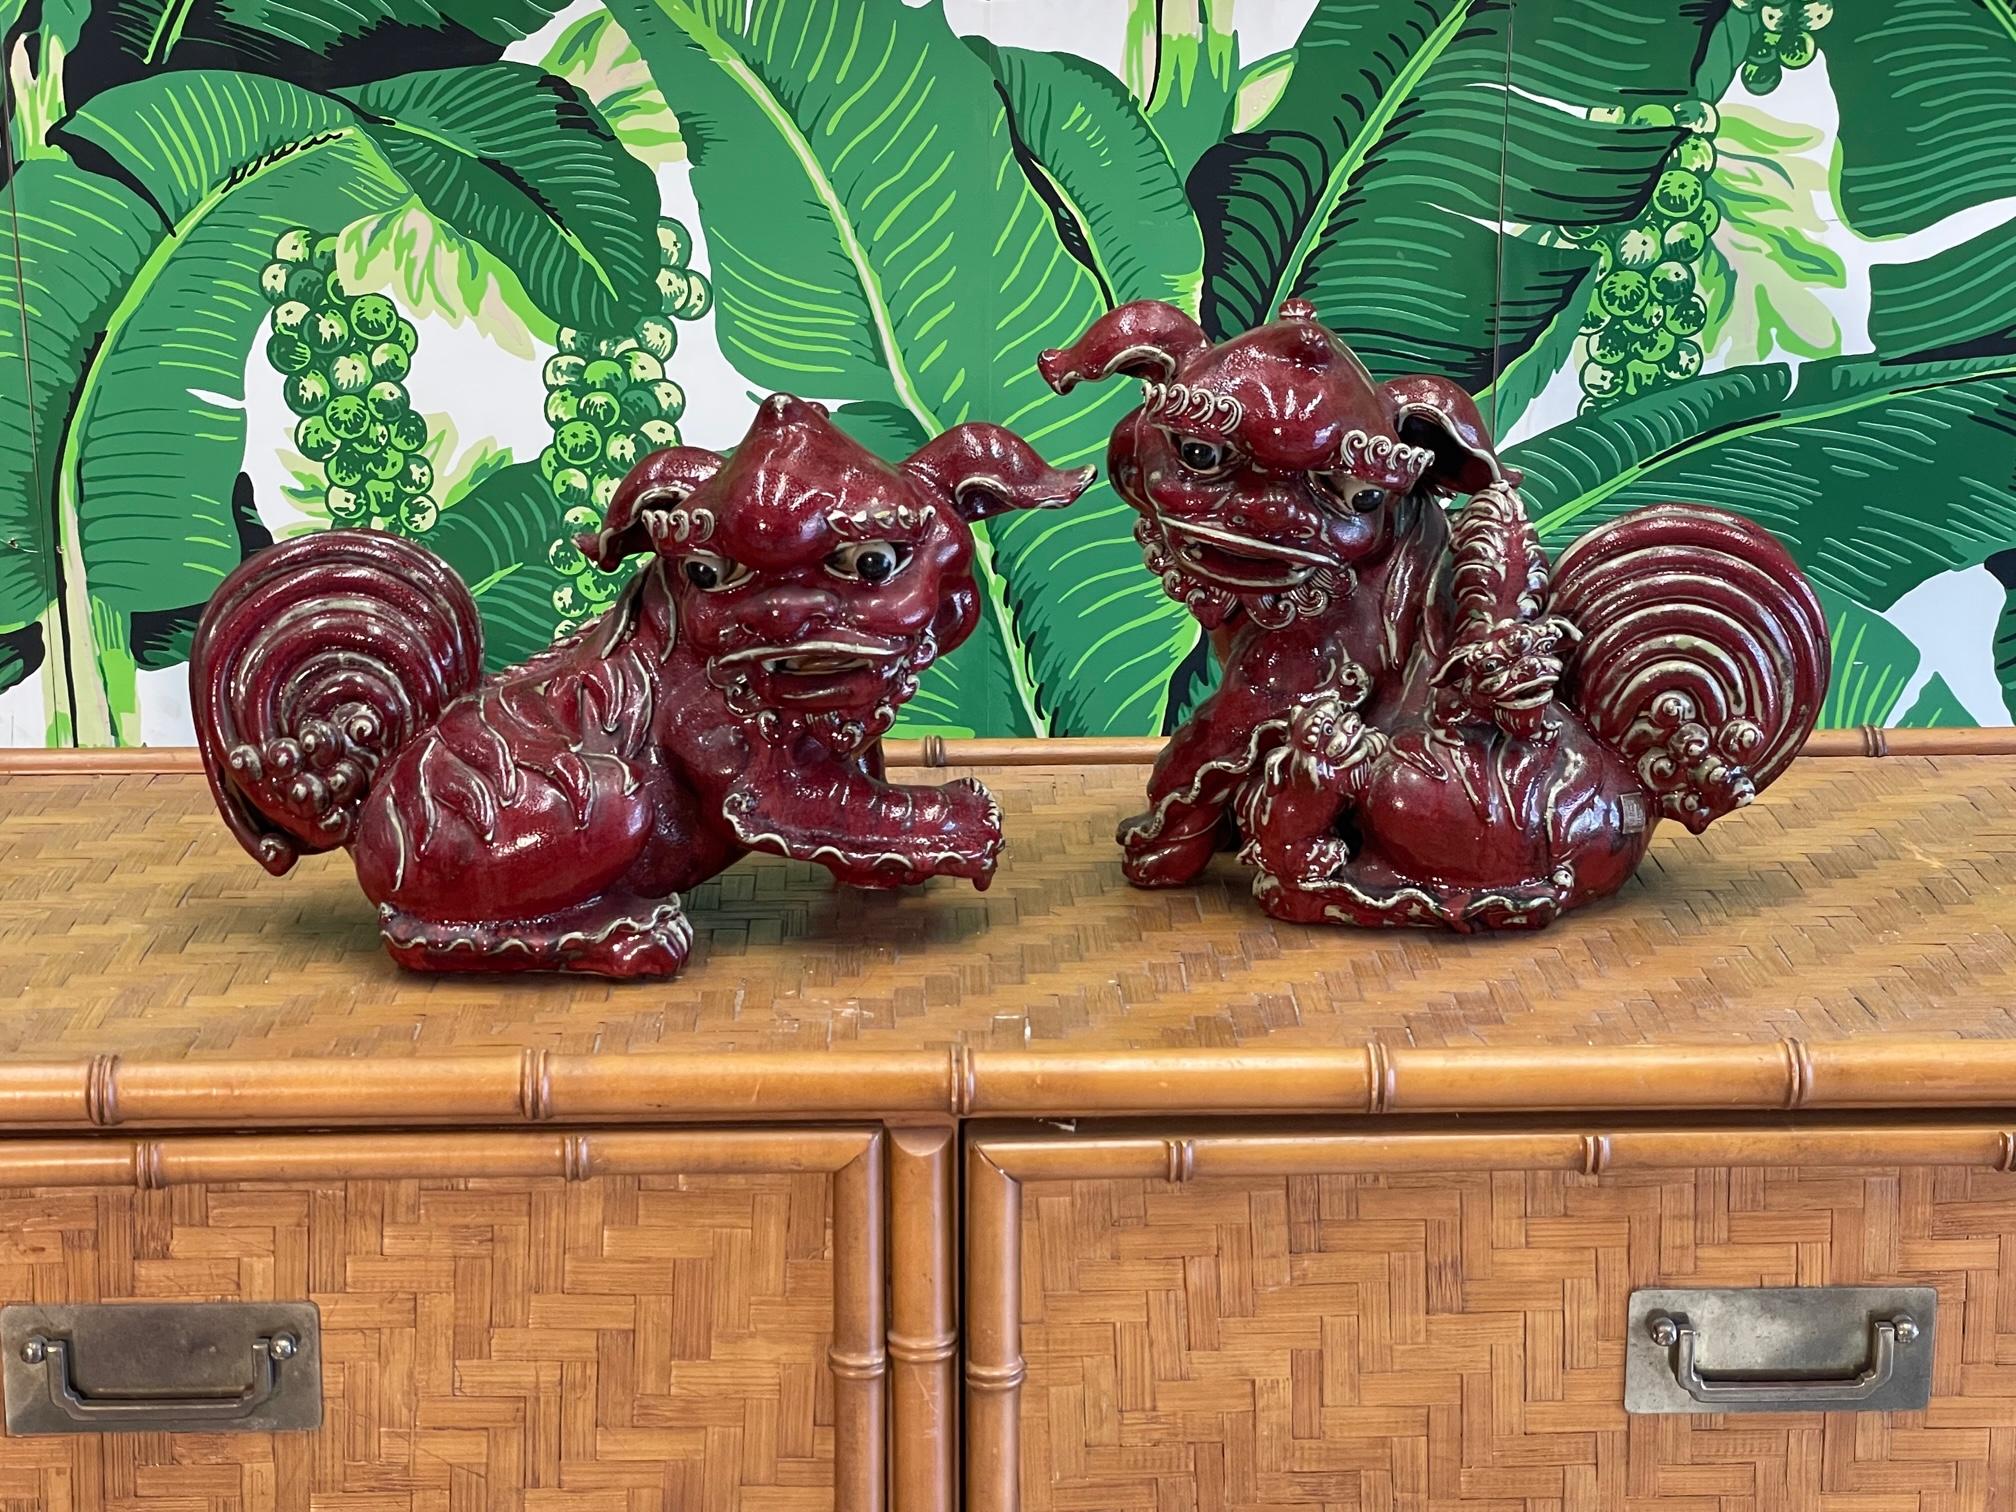 Pair of foo dog statues, father and mother carrying babies finished in cinnabar red. Good vintage condition with imperfections consistent with age and with hand made sculptures such as these. Mother has a cracked ear but is structurally sound. See